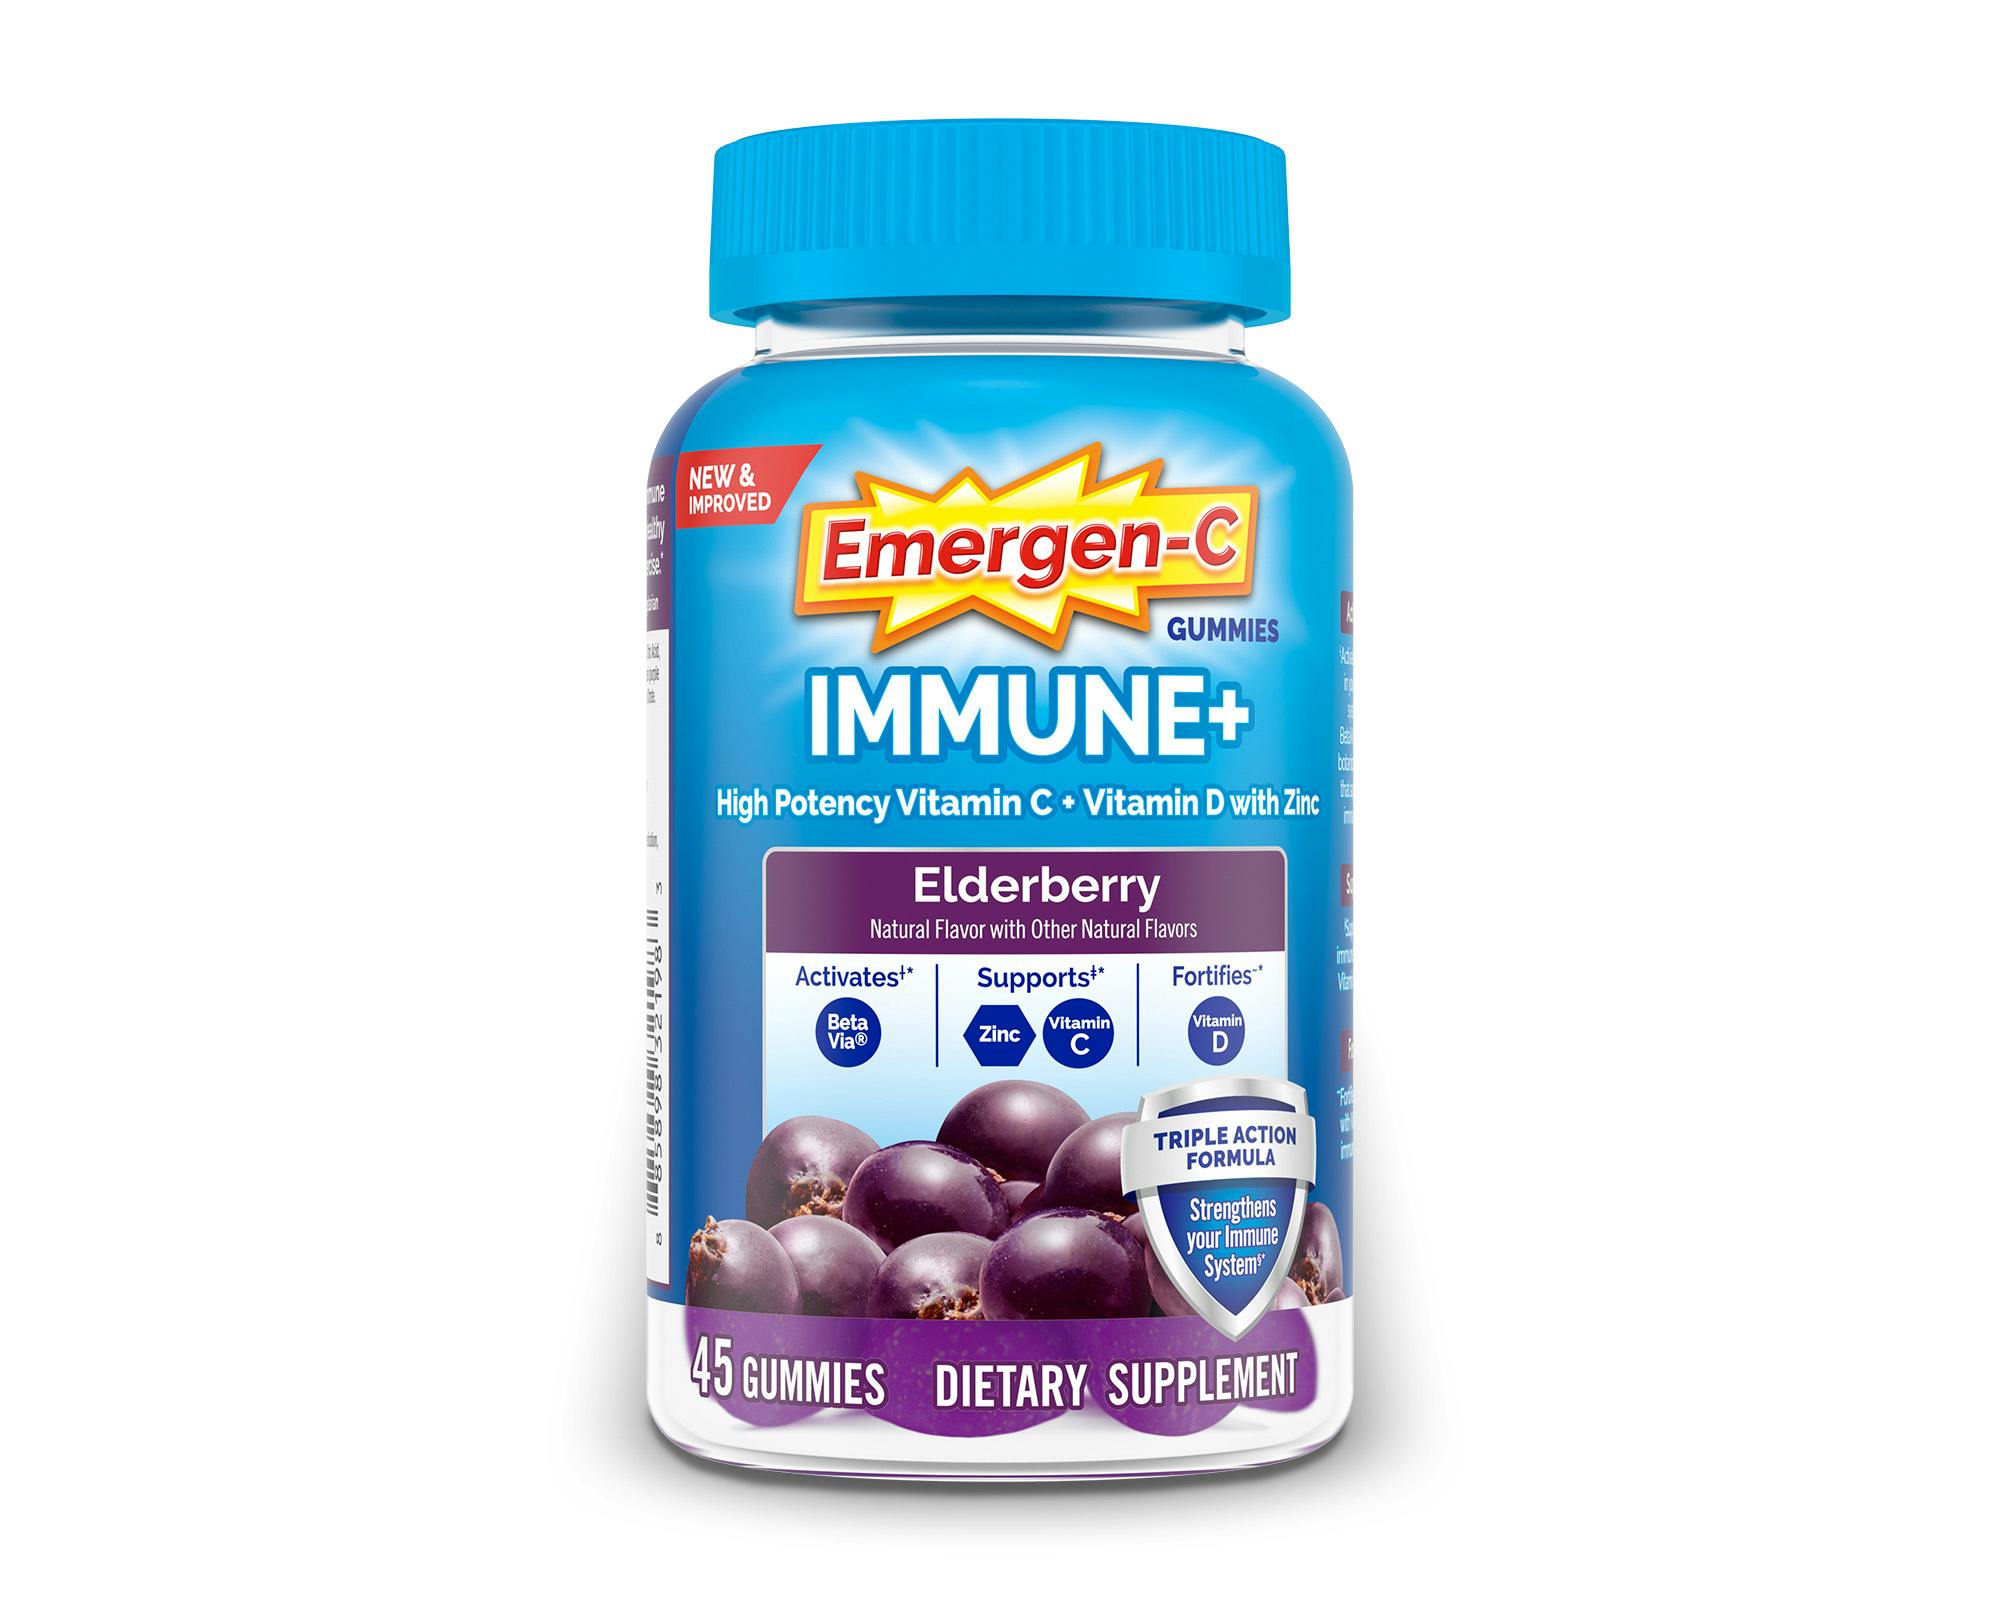 Immune+ Elderberry Gummies with Triple Action product